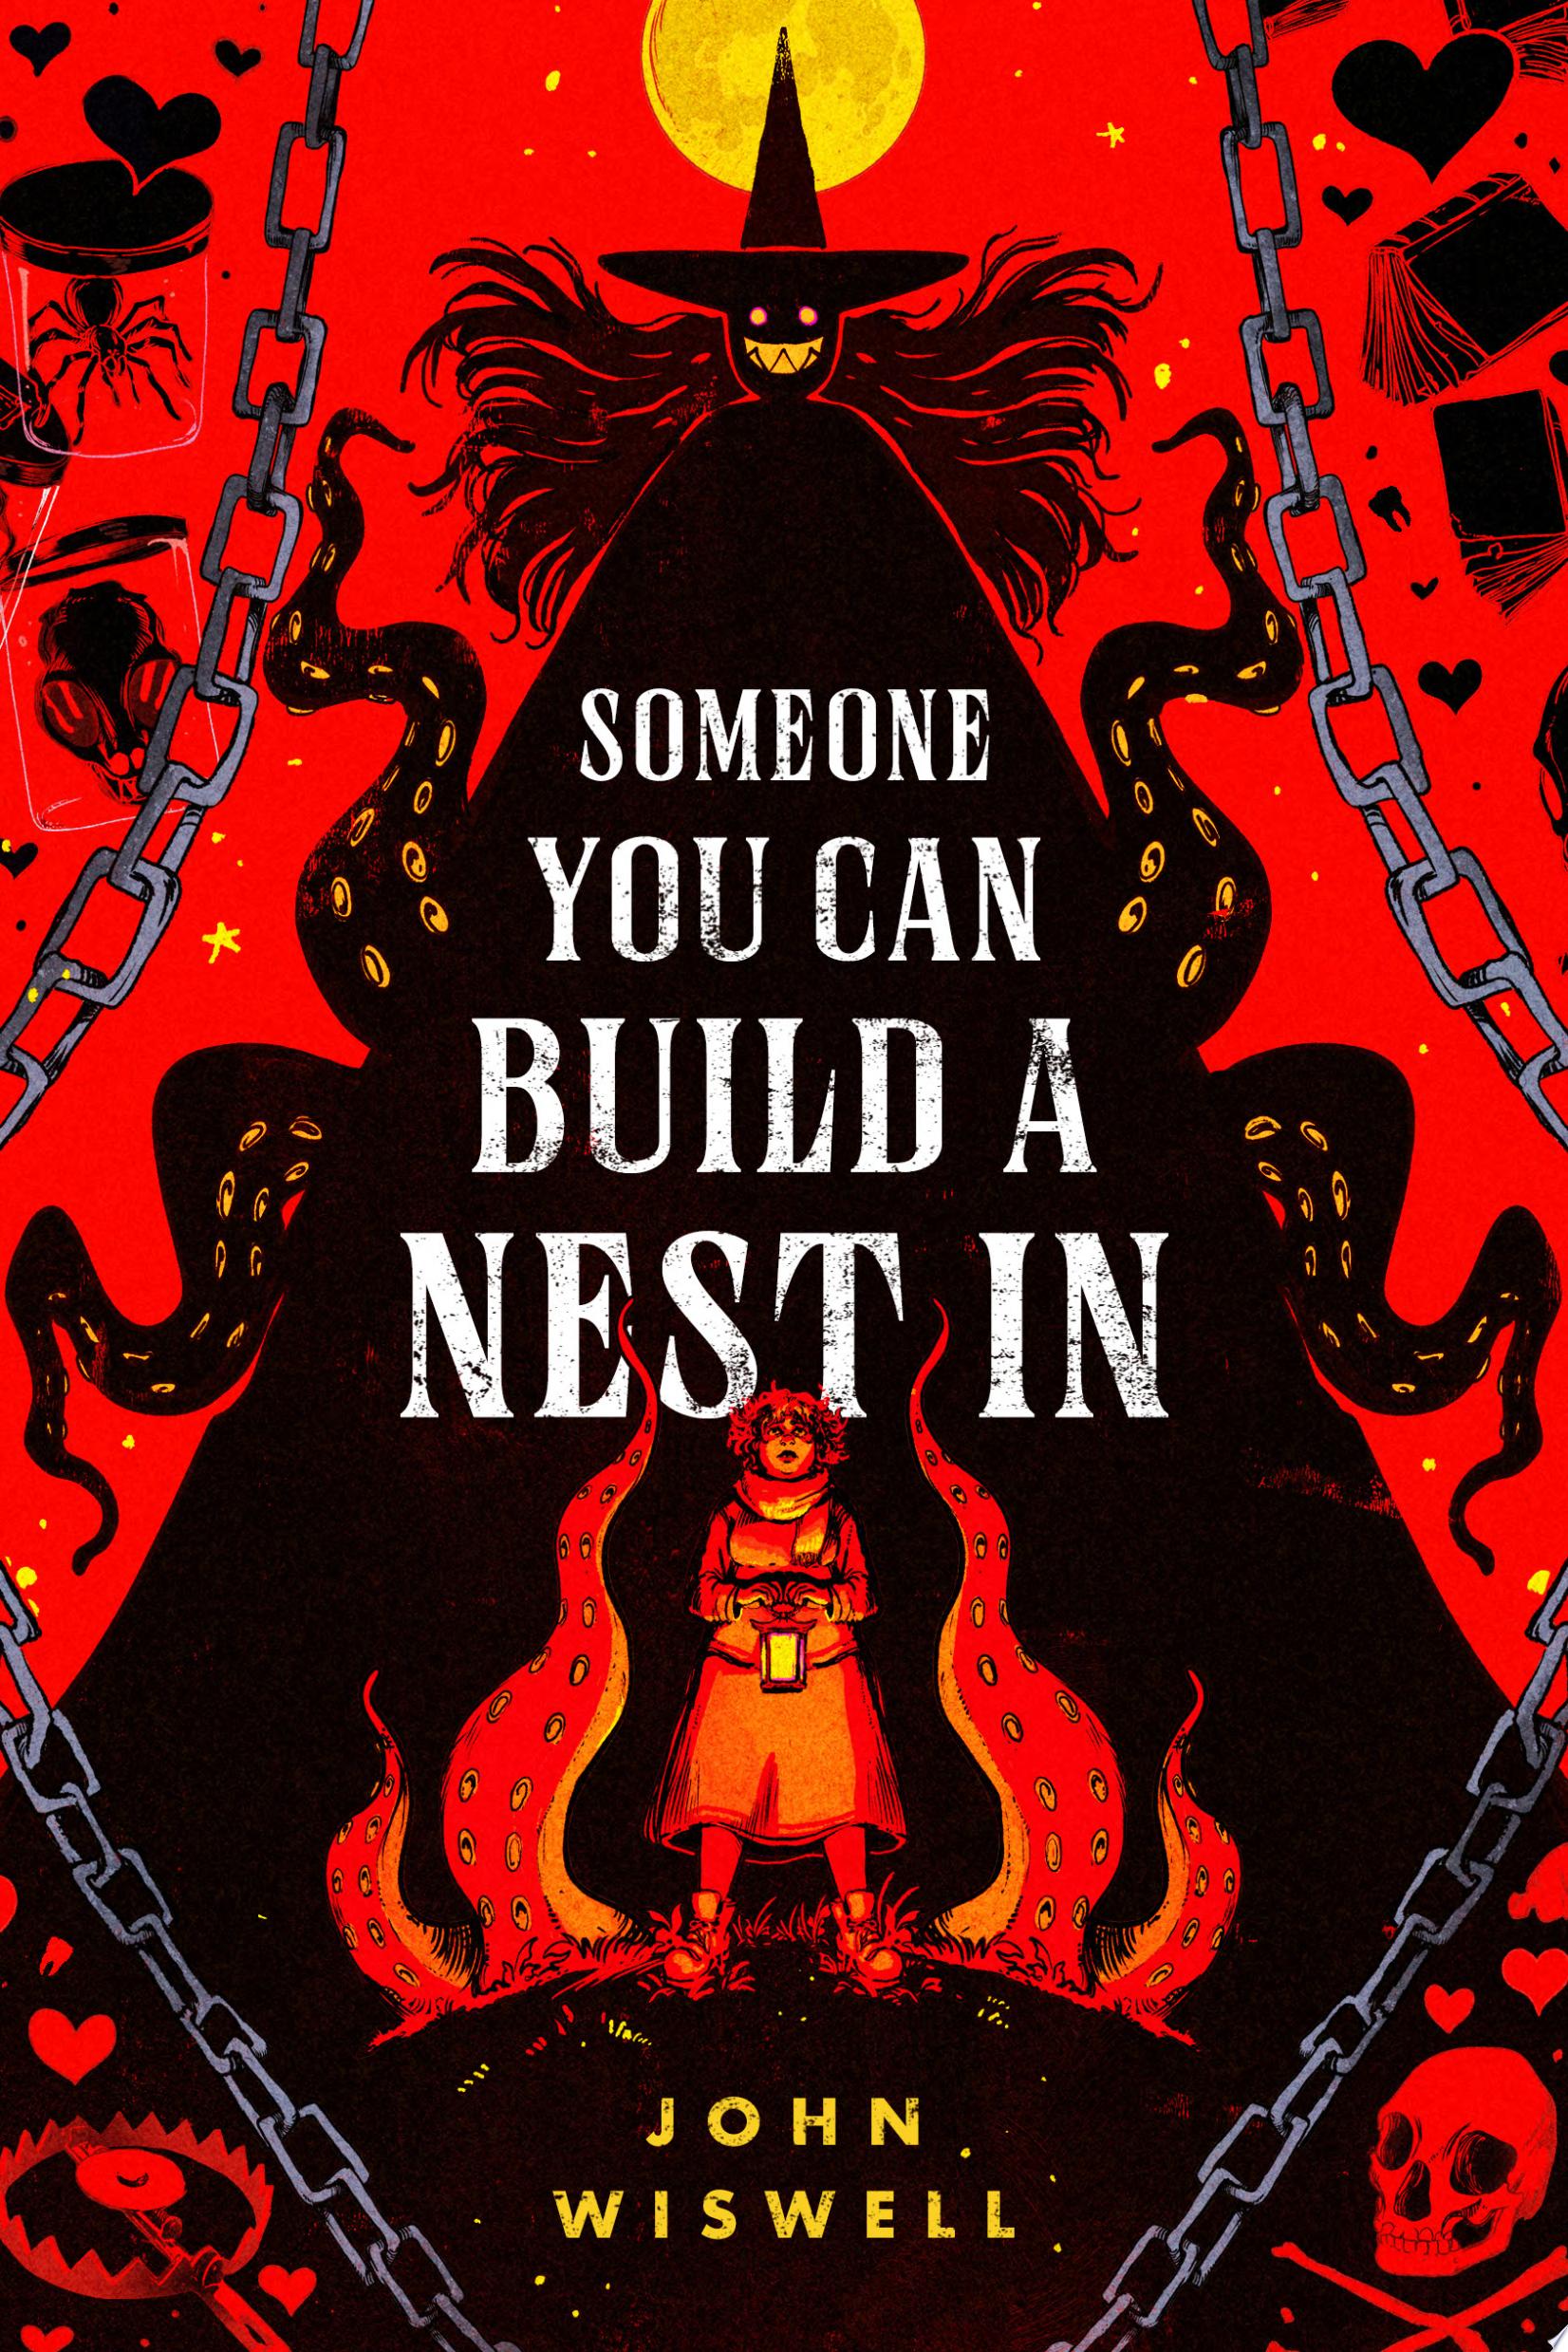 Image for "Someone You Can Build a Nest In"